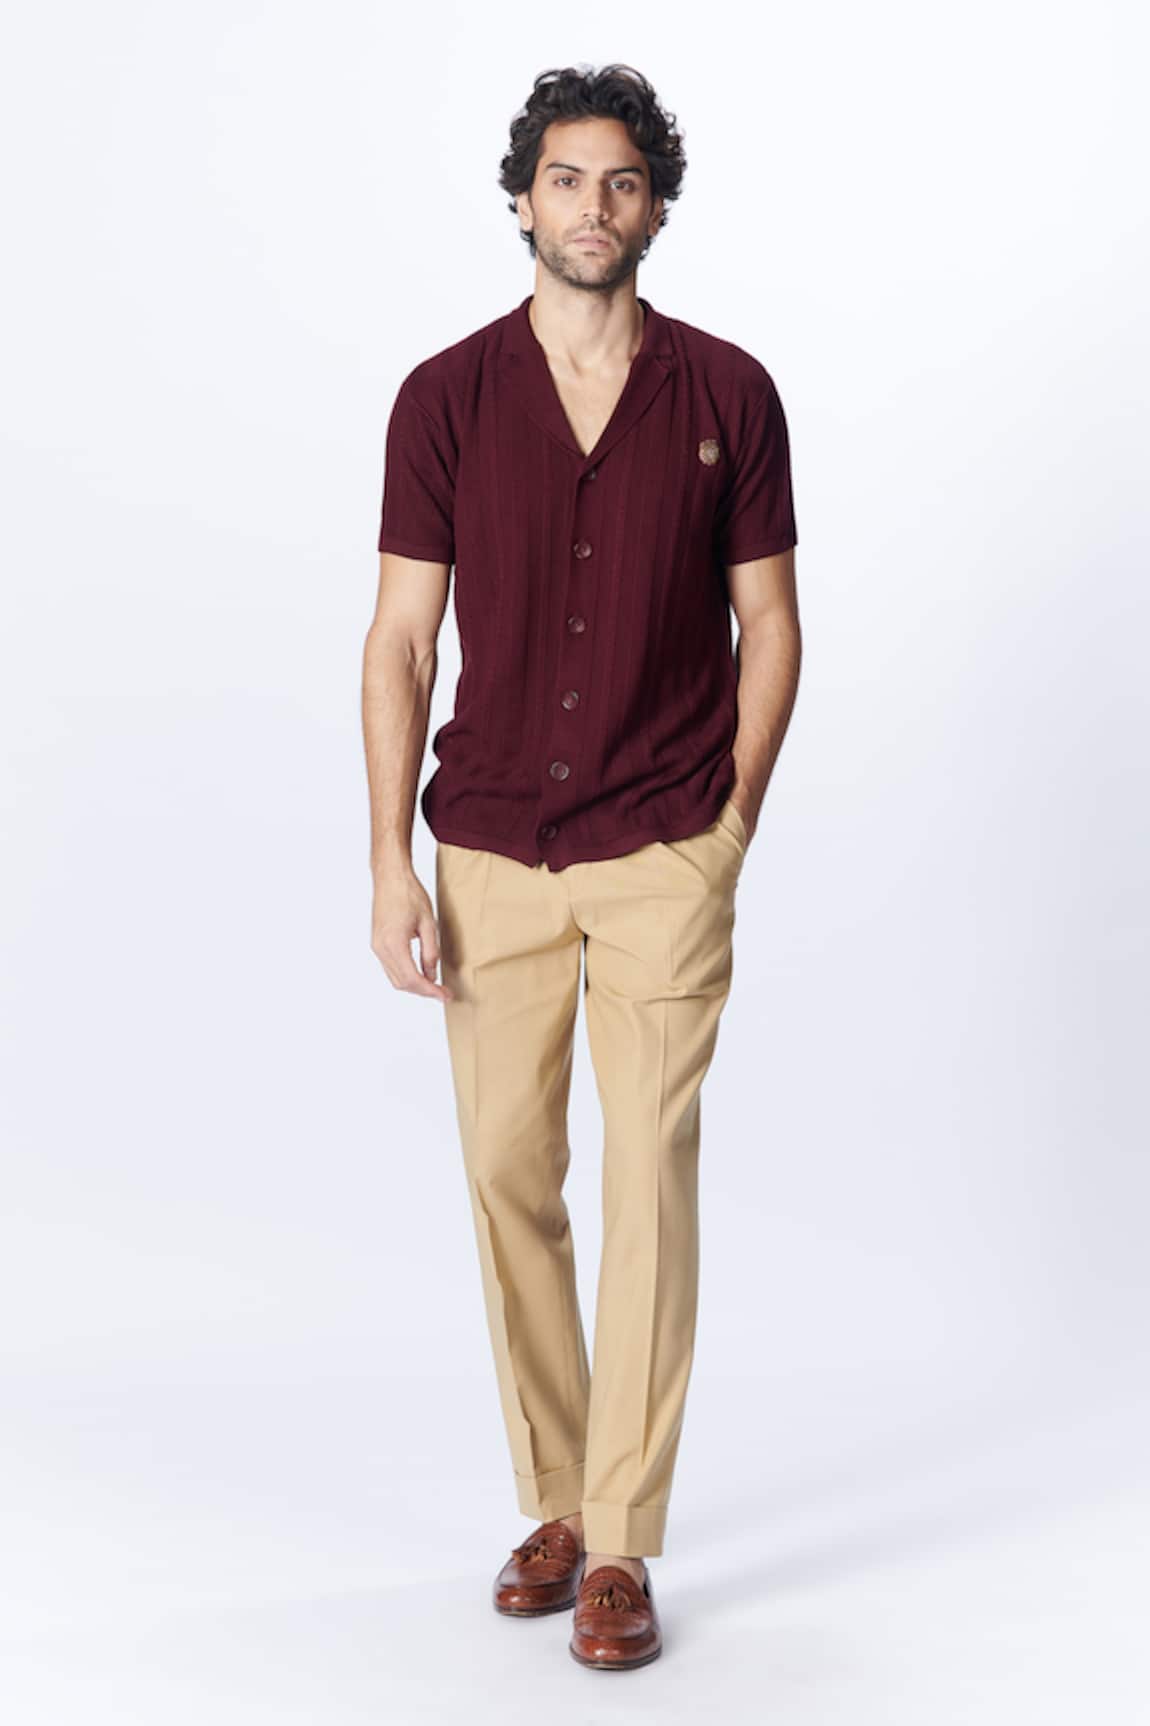 S&N by Shantnu Nikhil Placement Embroidered Shirt